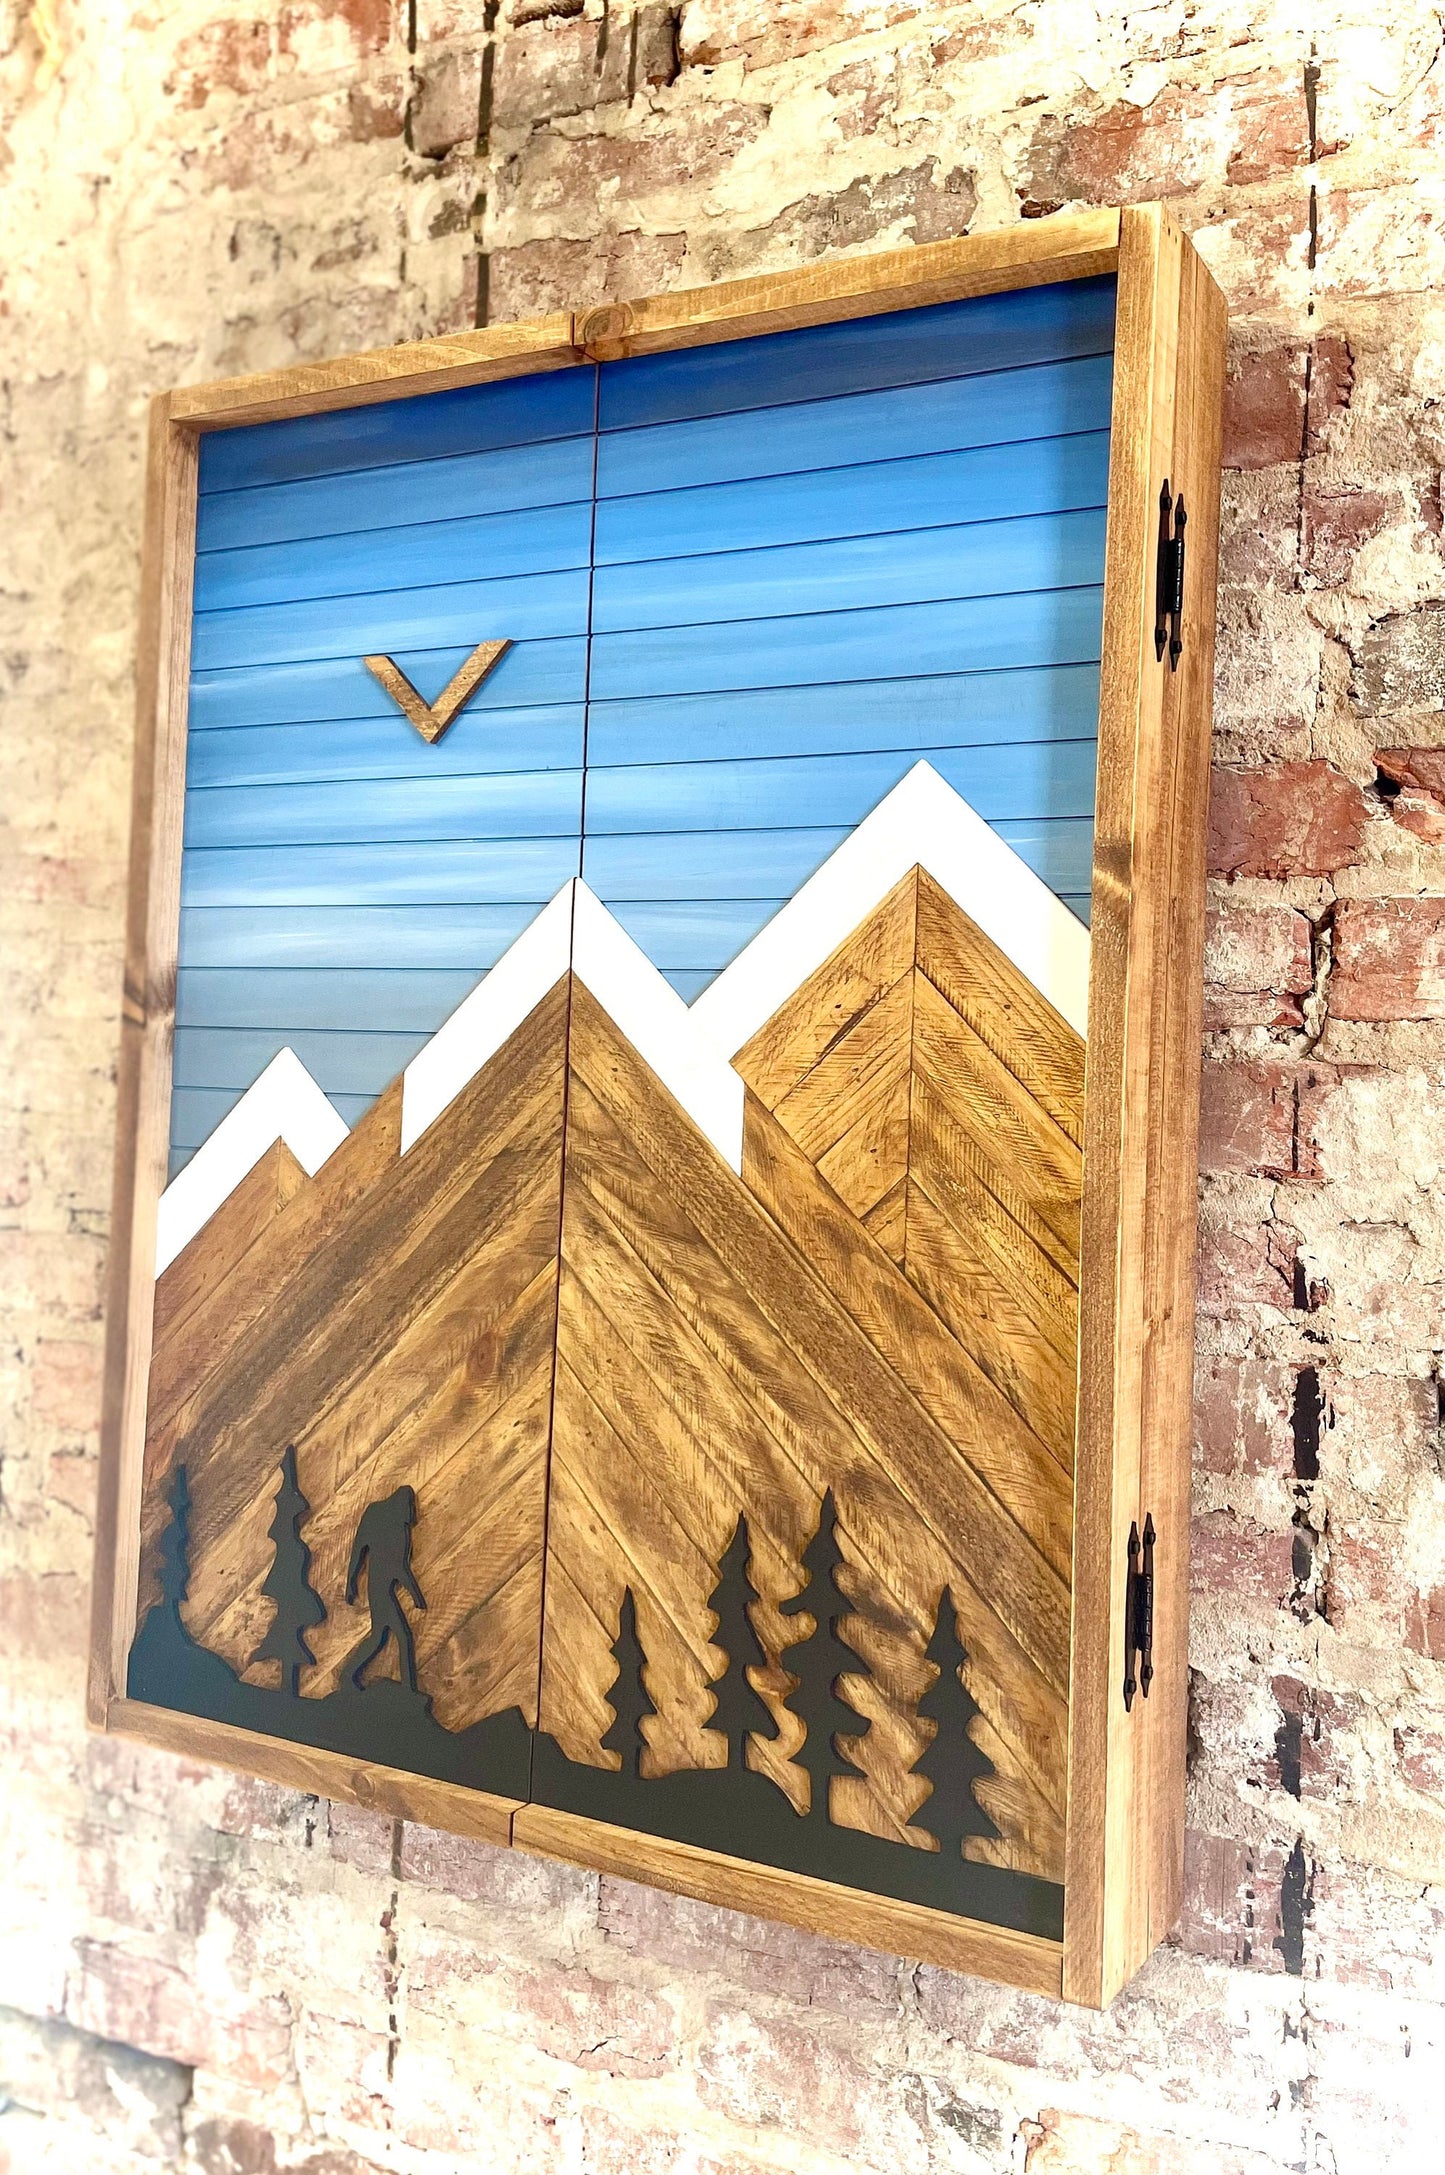 Electronic Dartboard Cabinet - Rustic Blue Sky w/ Trees and Bigfoot Mountain Art 33”x26”-Rustic Cabinet -Game Room/Man Cave Art Home Decor